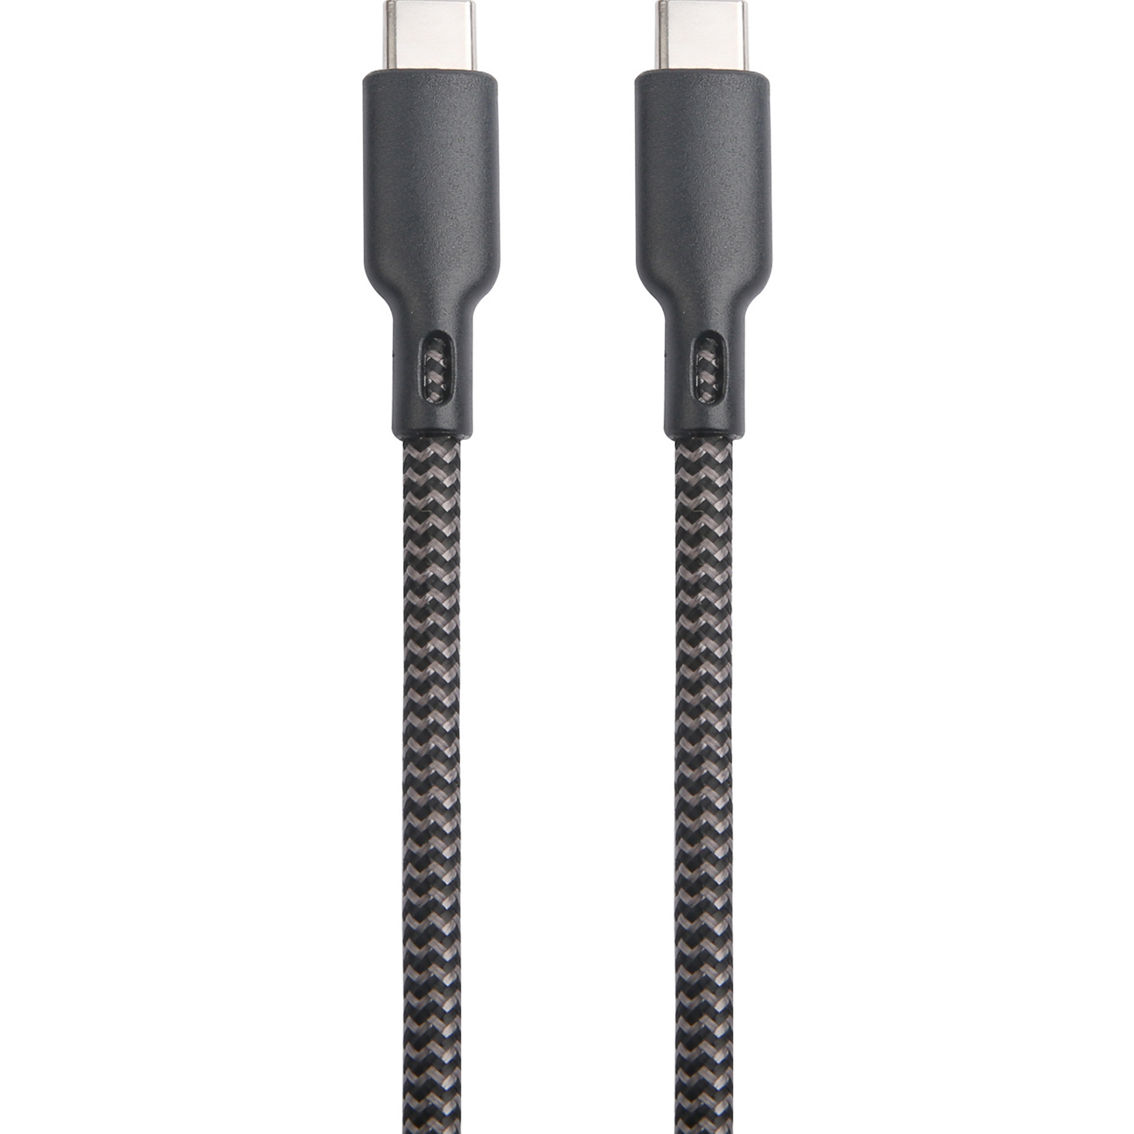 Powerzone USB 2.0 Type C to C 10ft. Braided Cable - Image 2 of 5